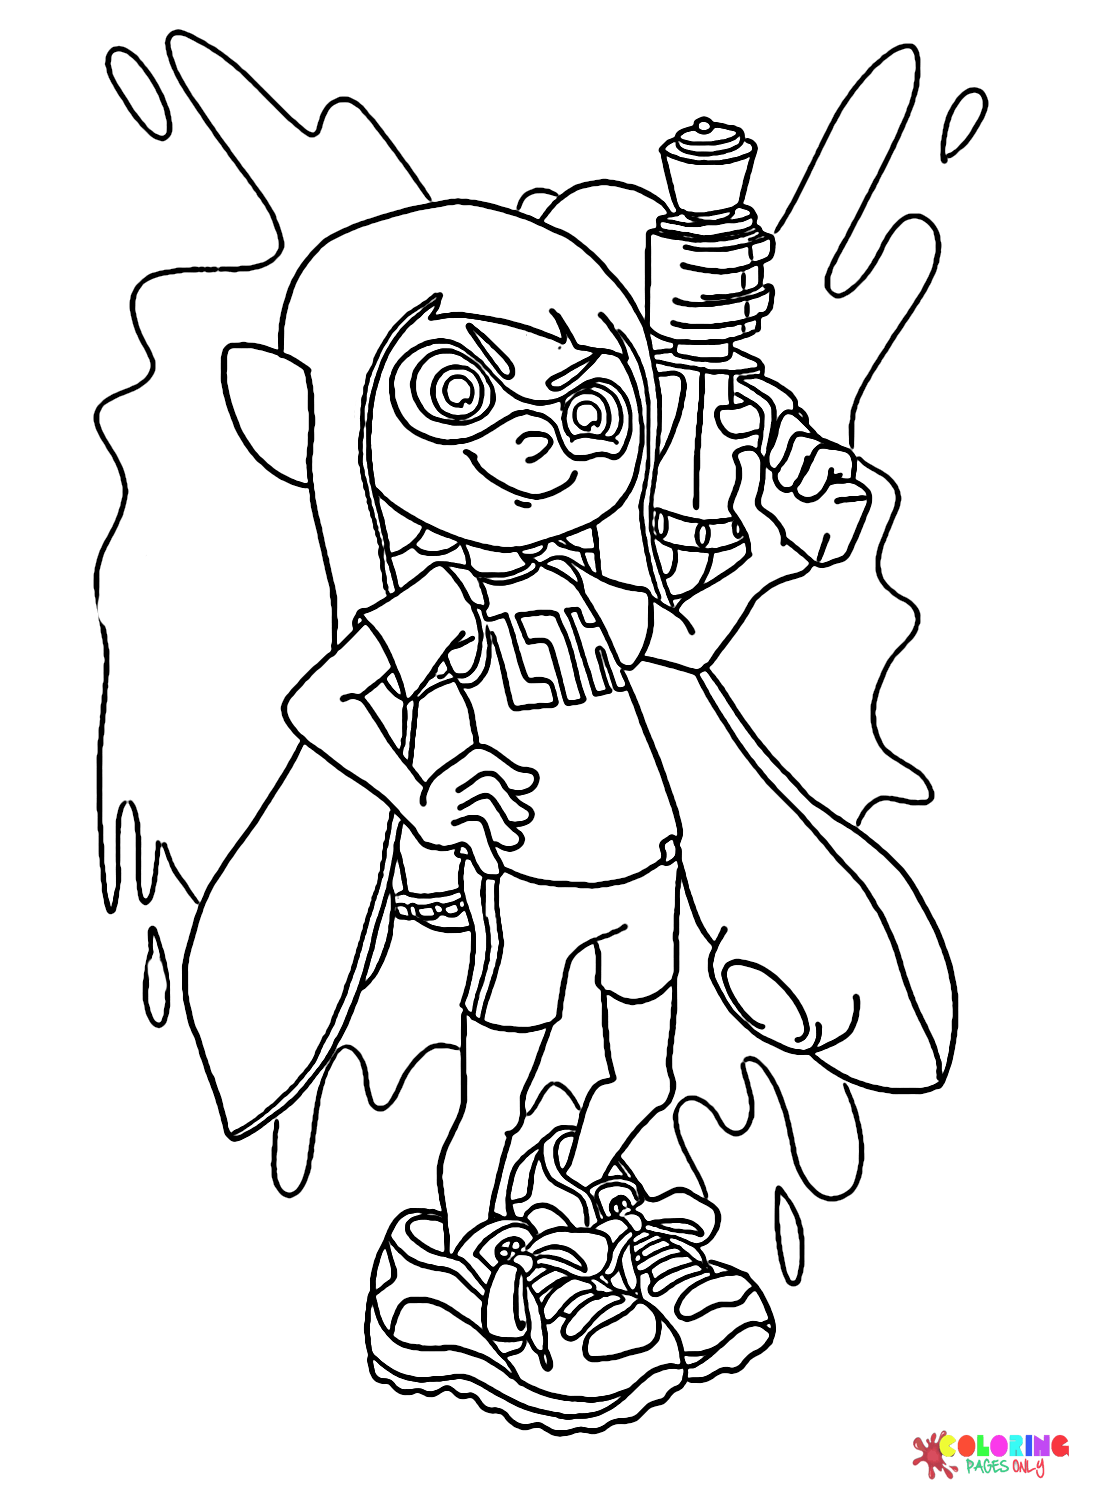 Splatoon Inkling Girl Coloring Page - Free Printable Coloring Pages